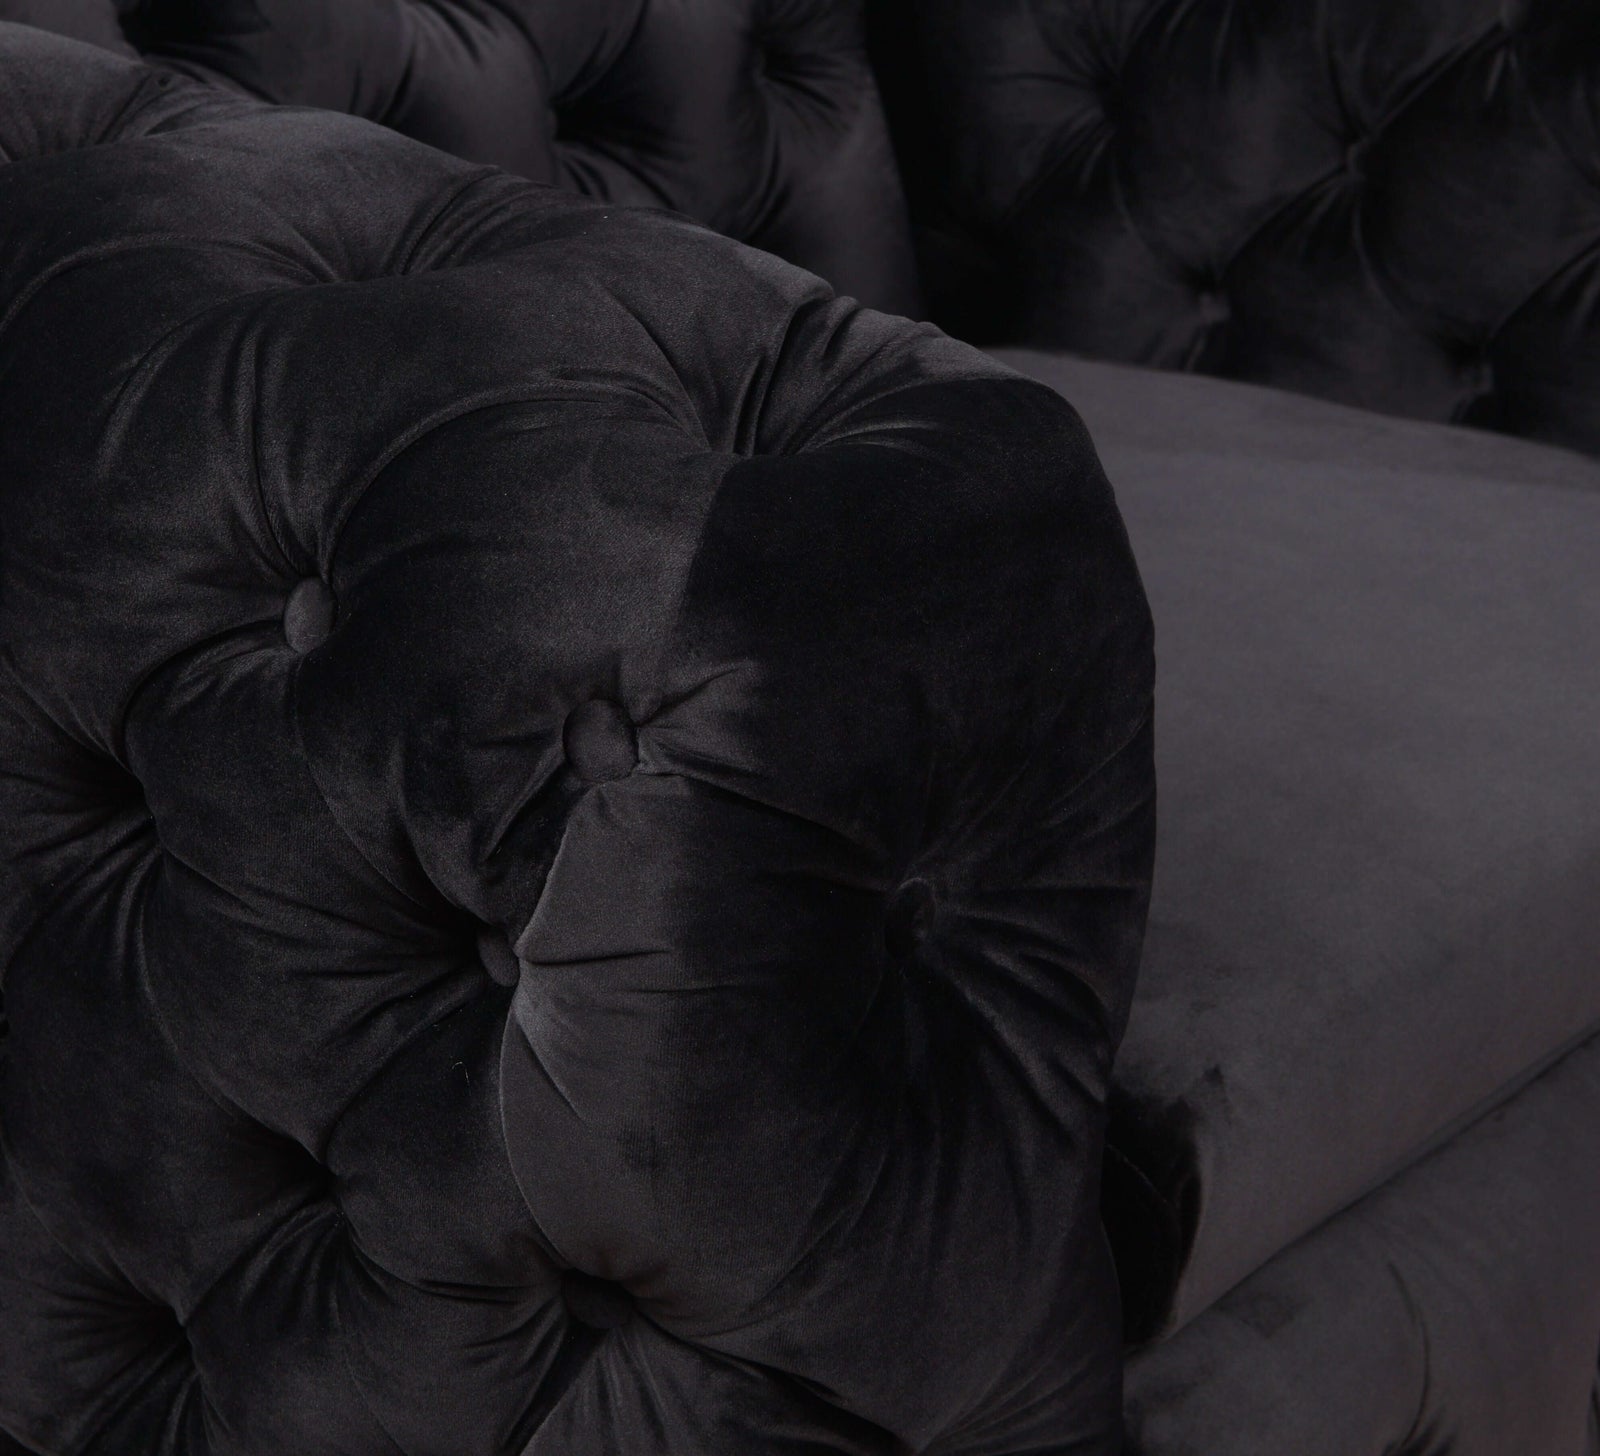 Single Seater Black Sofa Classic Armchair Button Tufted in Velvet Fabric with Metal Legs-Upinteriors